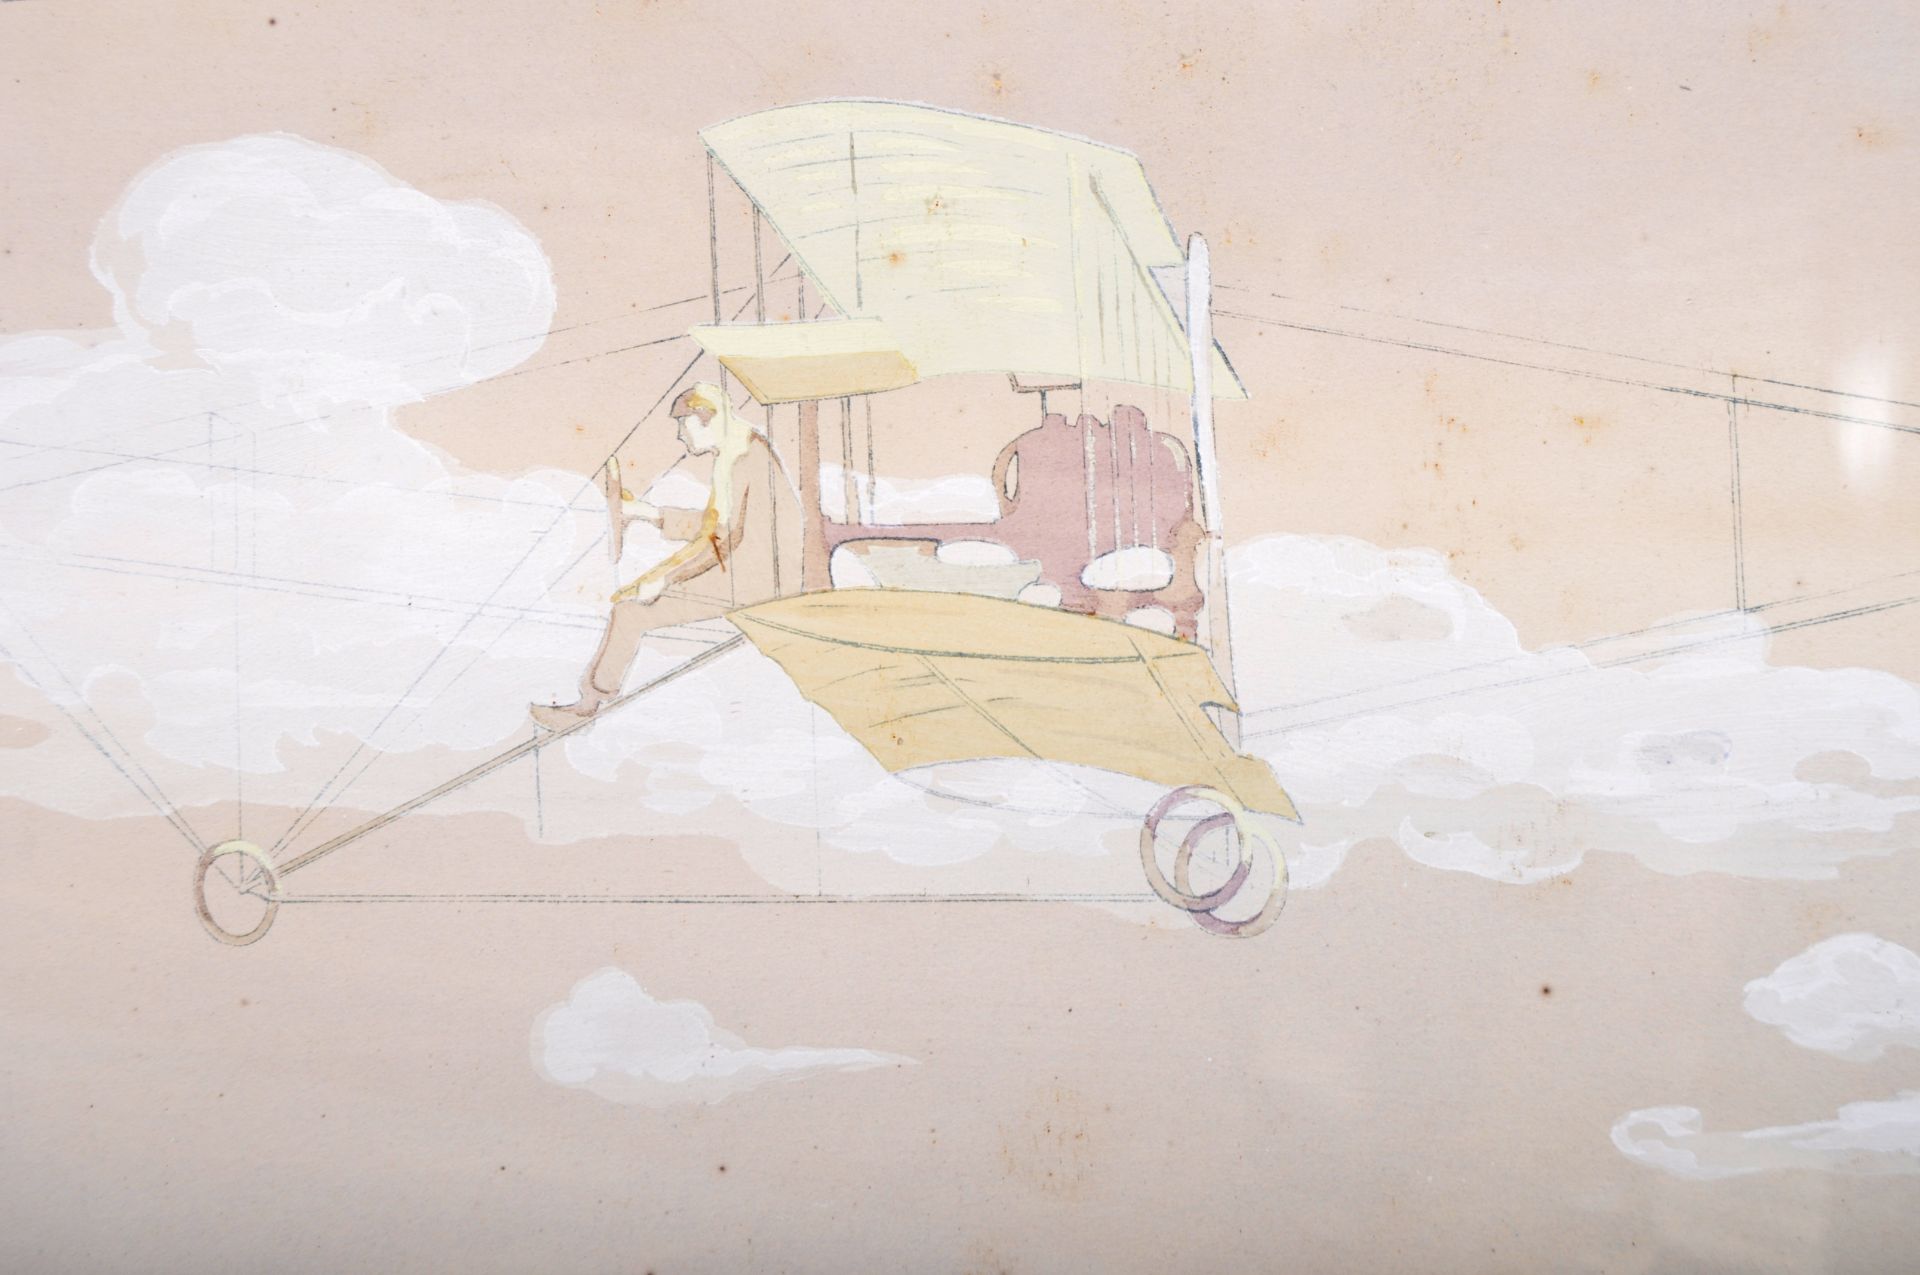 ERNEST MONTAUT & MARGUERITE (GAMY) MONTAUT - EARLY AIRCRAFT COLOURED LITHOGRAPH - Image 3 of 5